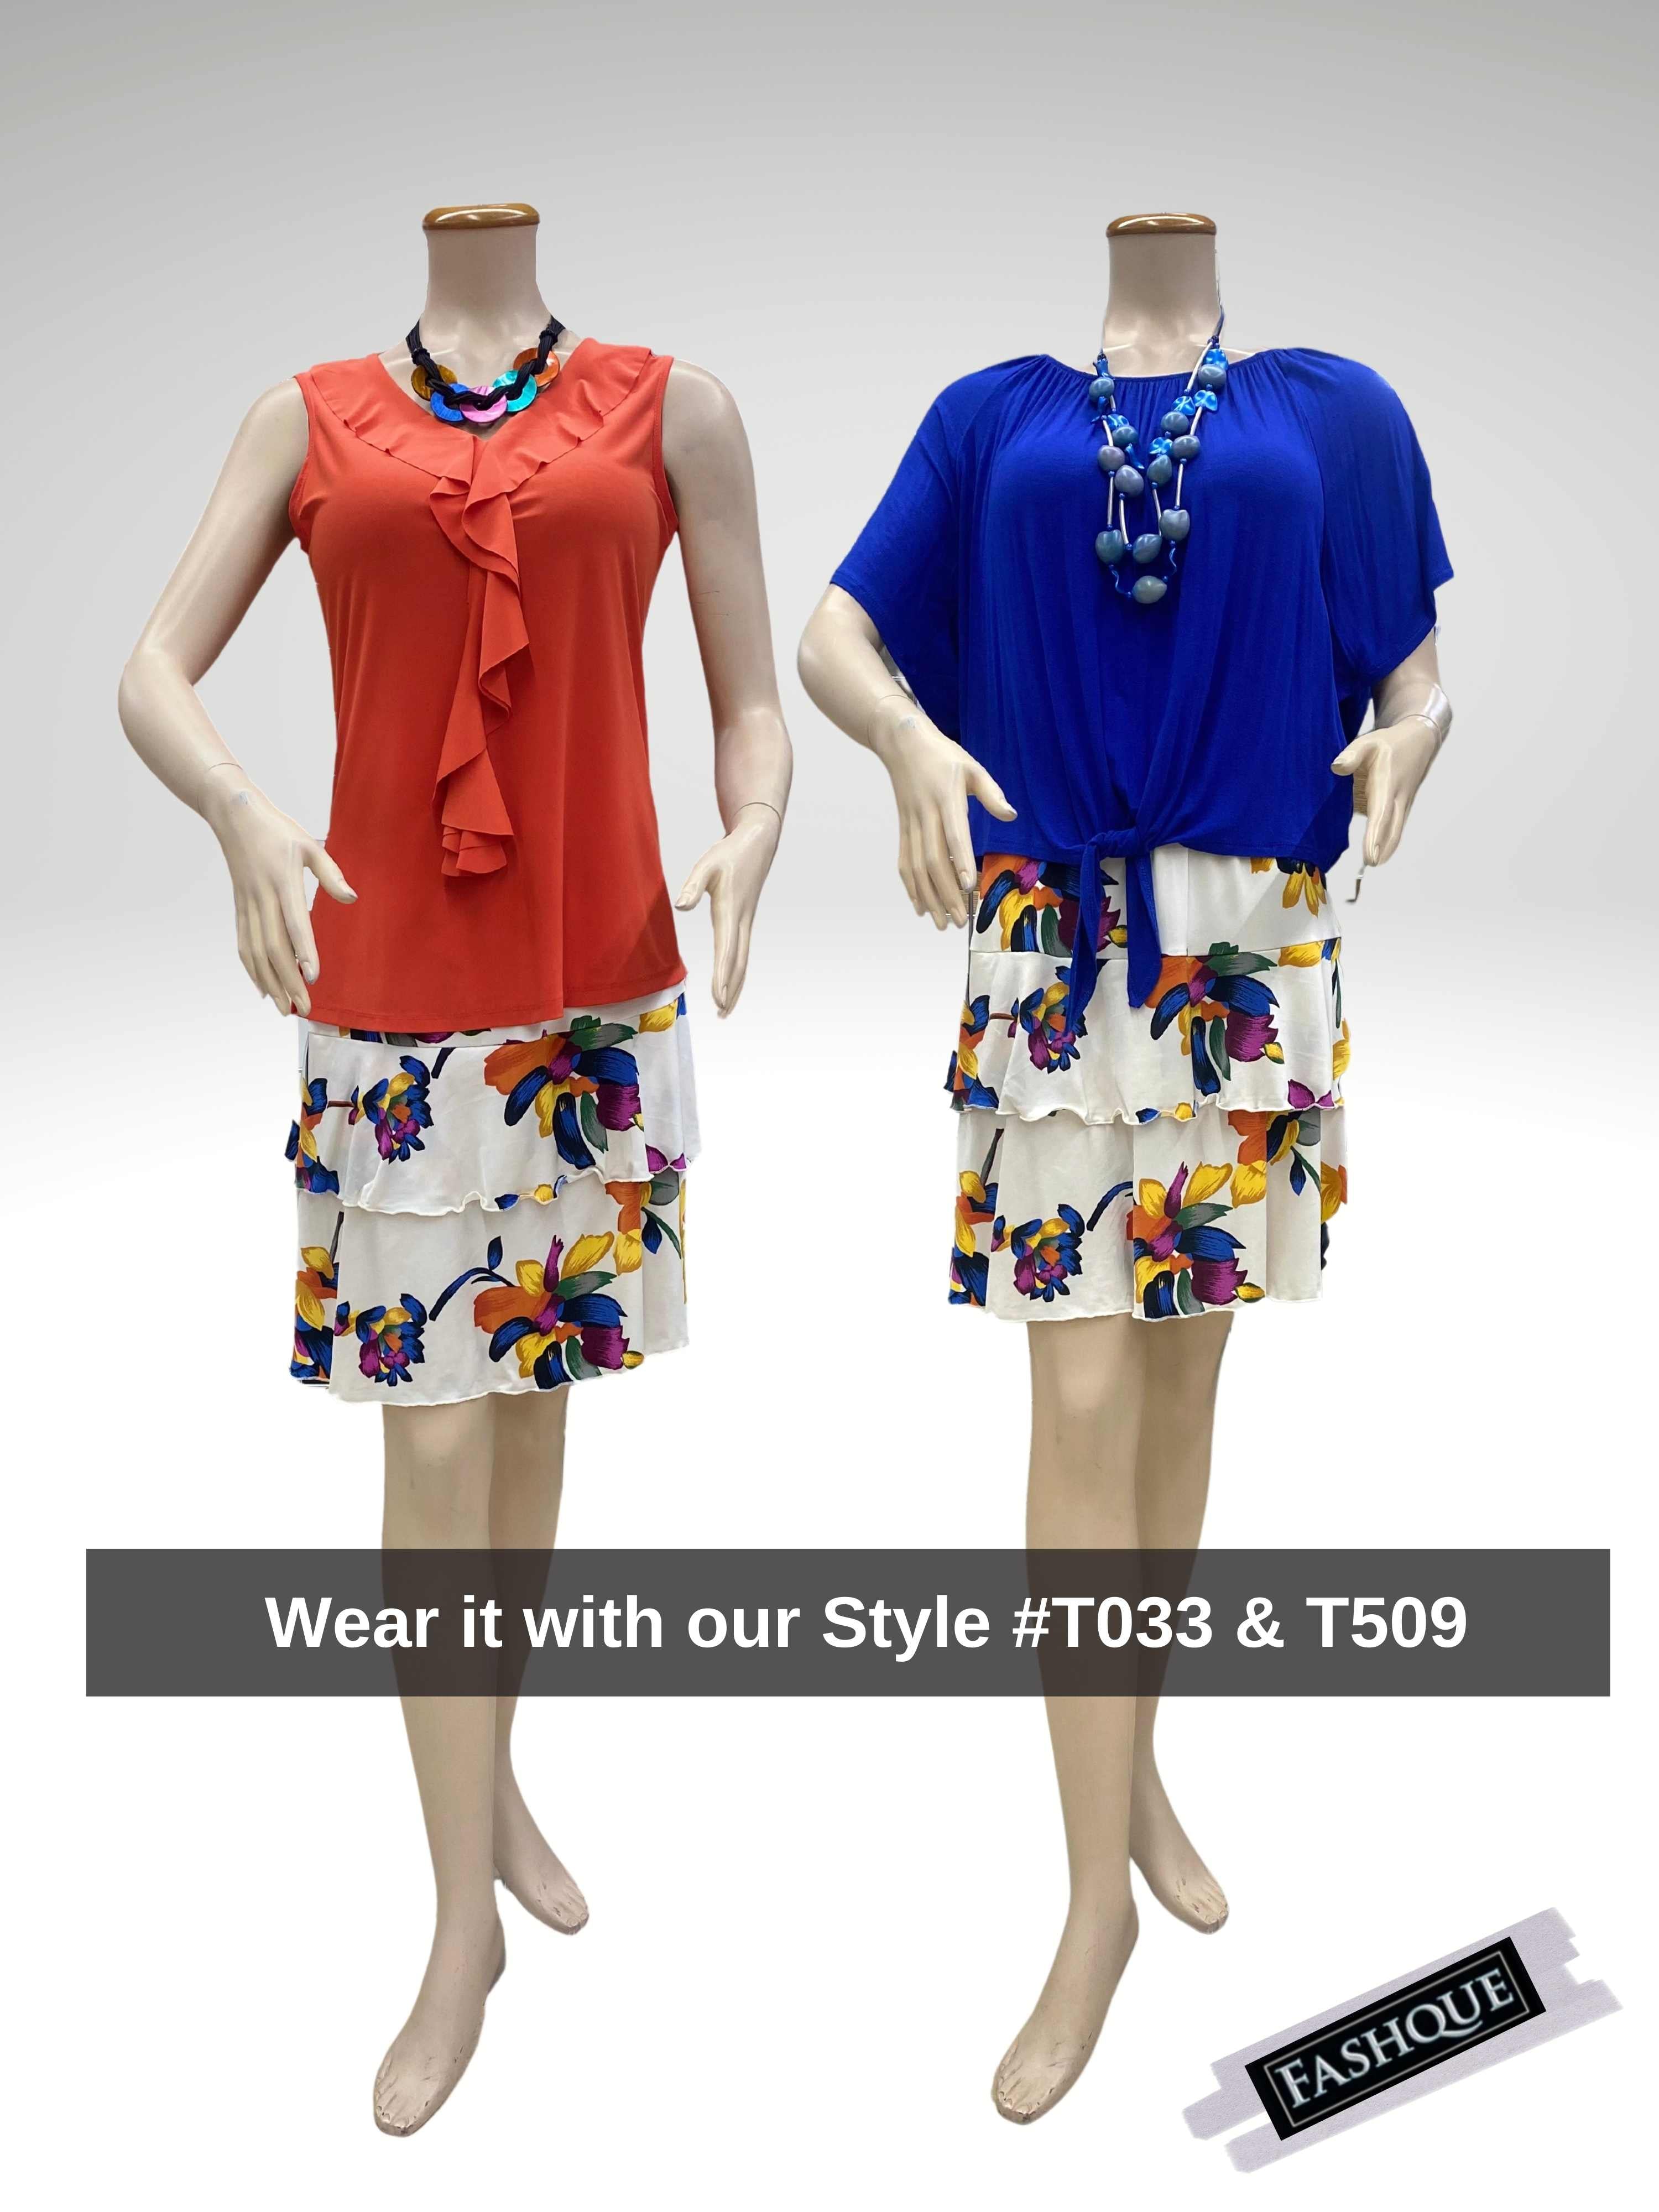 3 Tier PRINTED SKORT with the Ruffle in the center - SH001